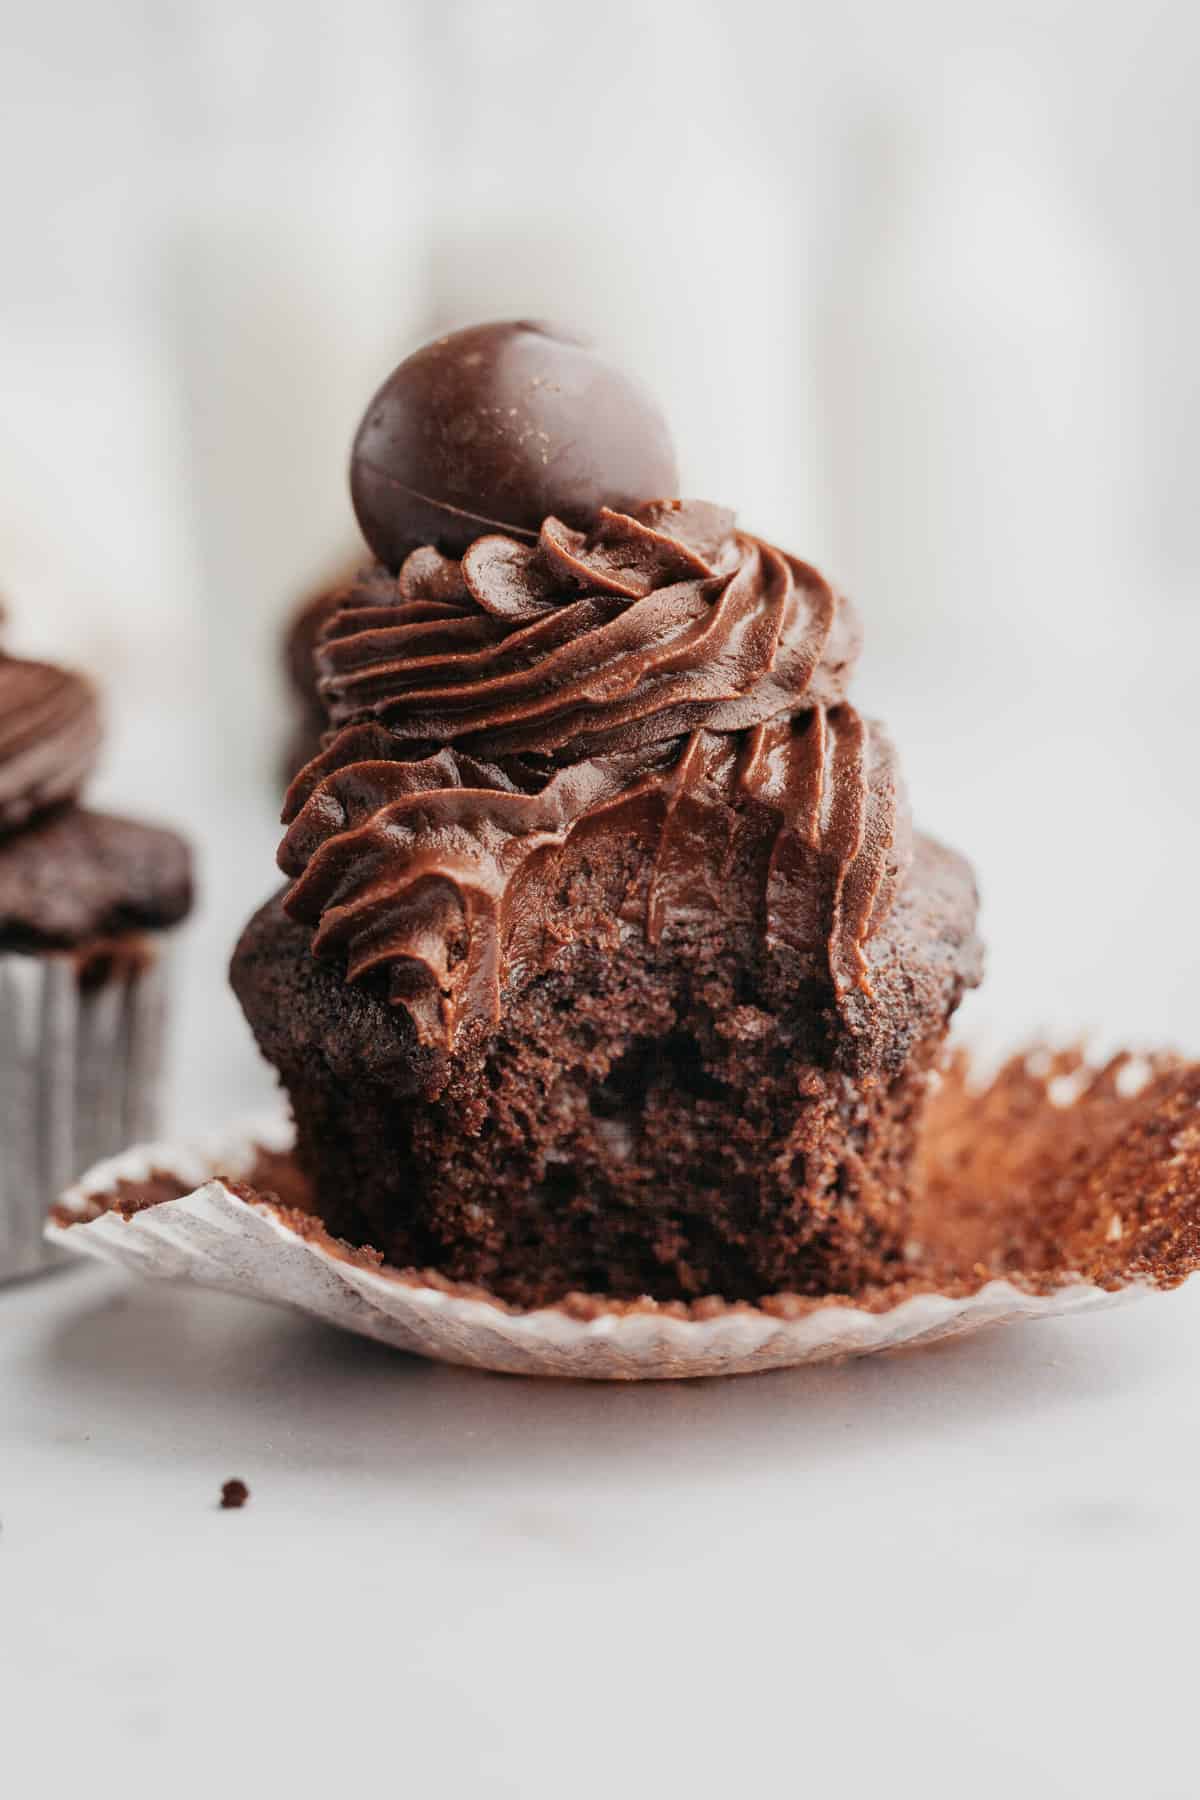 A close up of a chocolate fudge cupcake with a bite taken out of it.